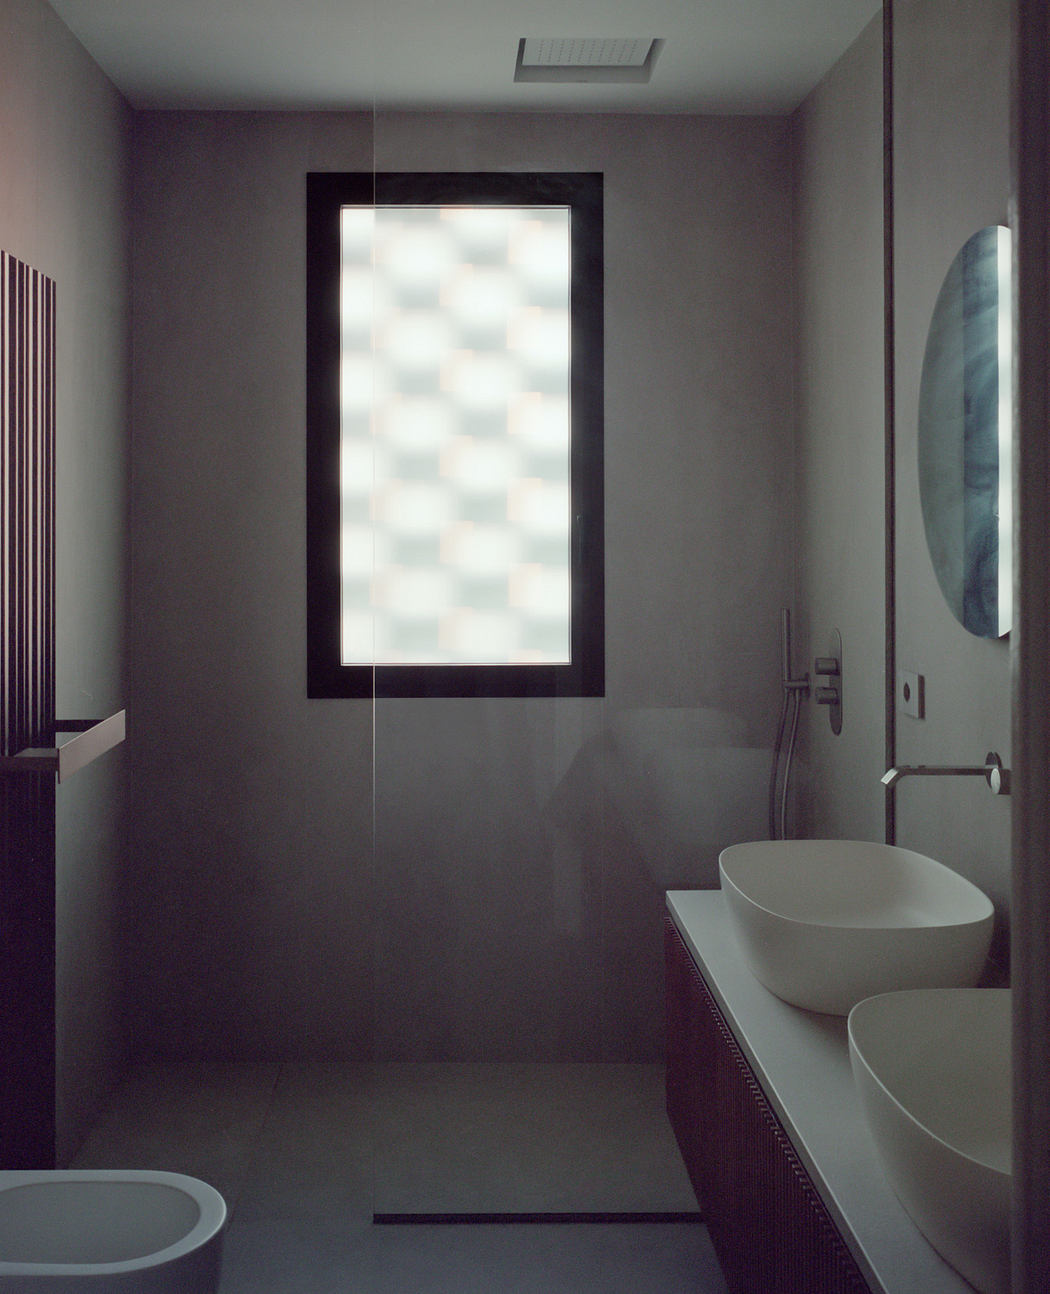 Modern bathroom with frosted window light and minimalistic design.